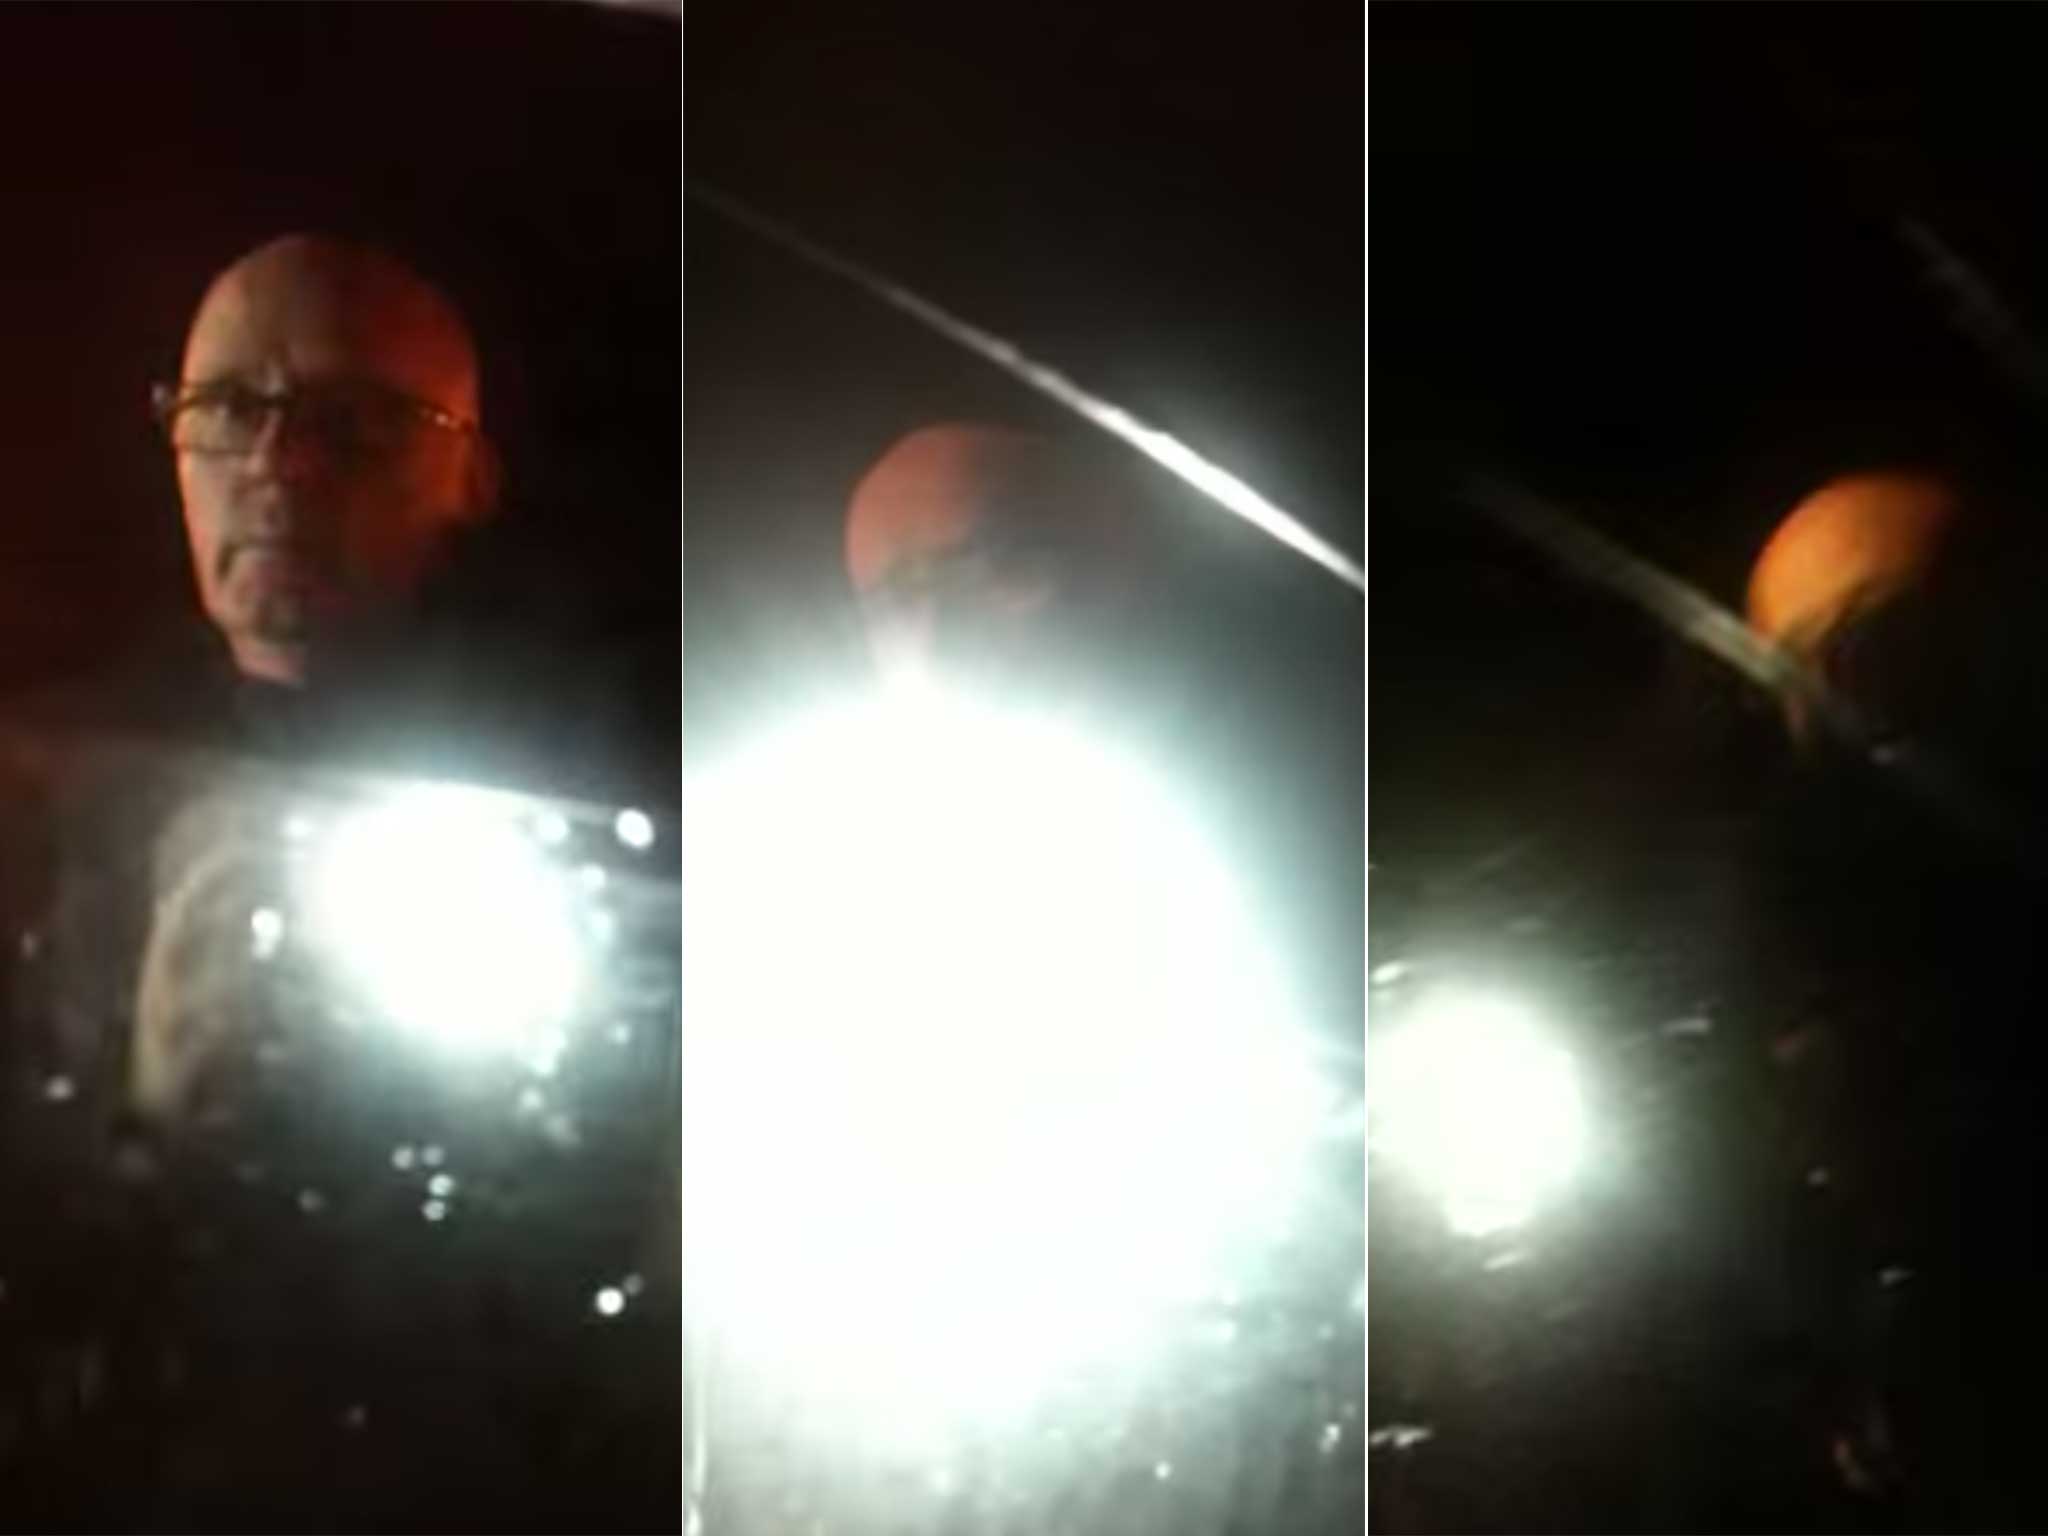 Screengrabs from the video